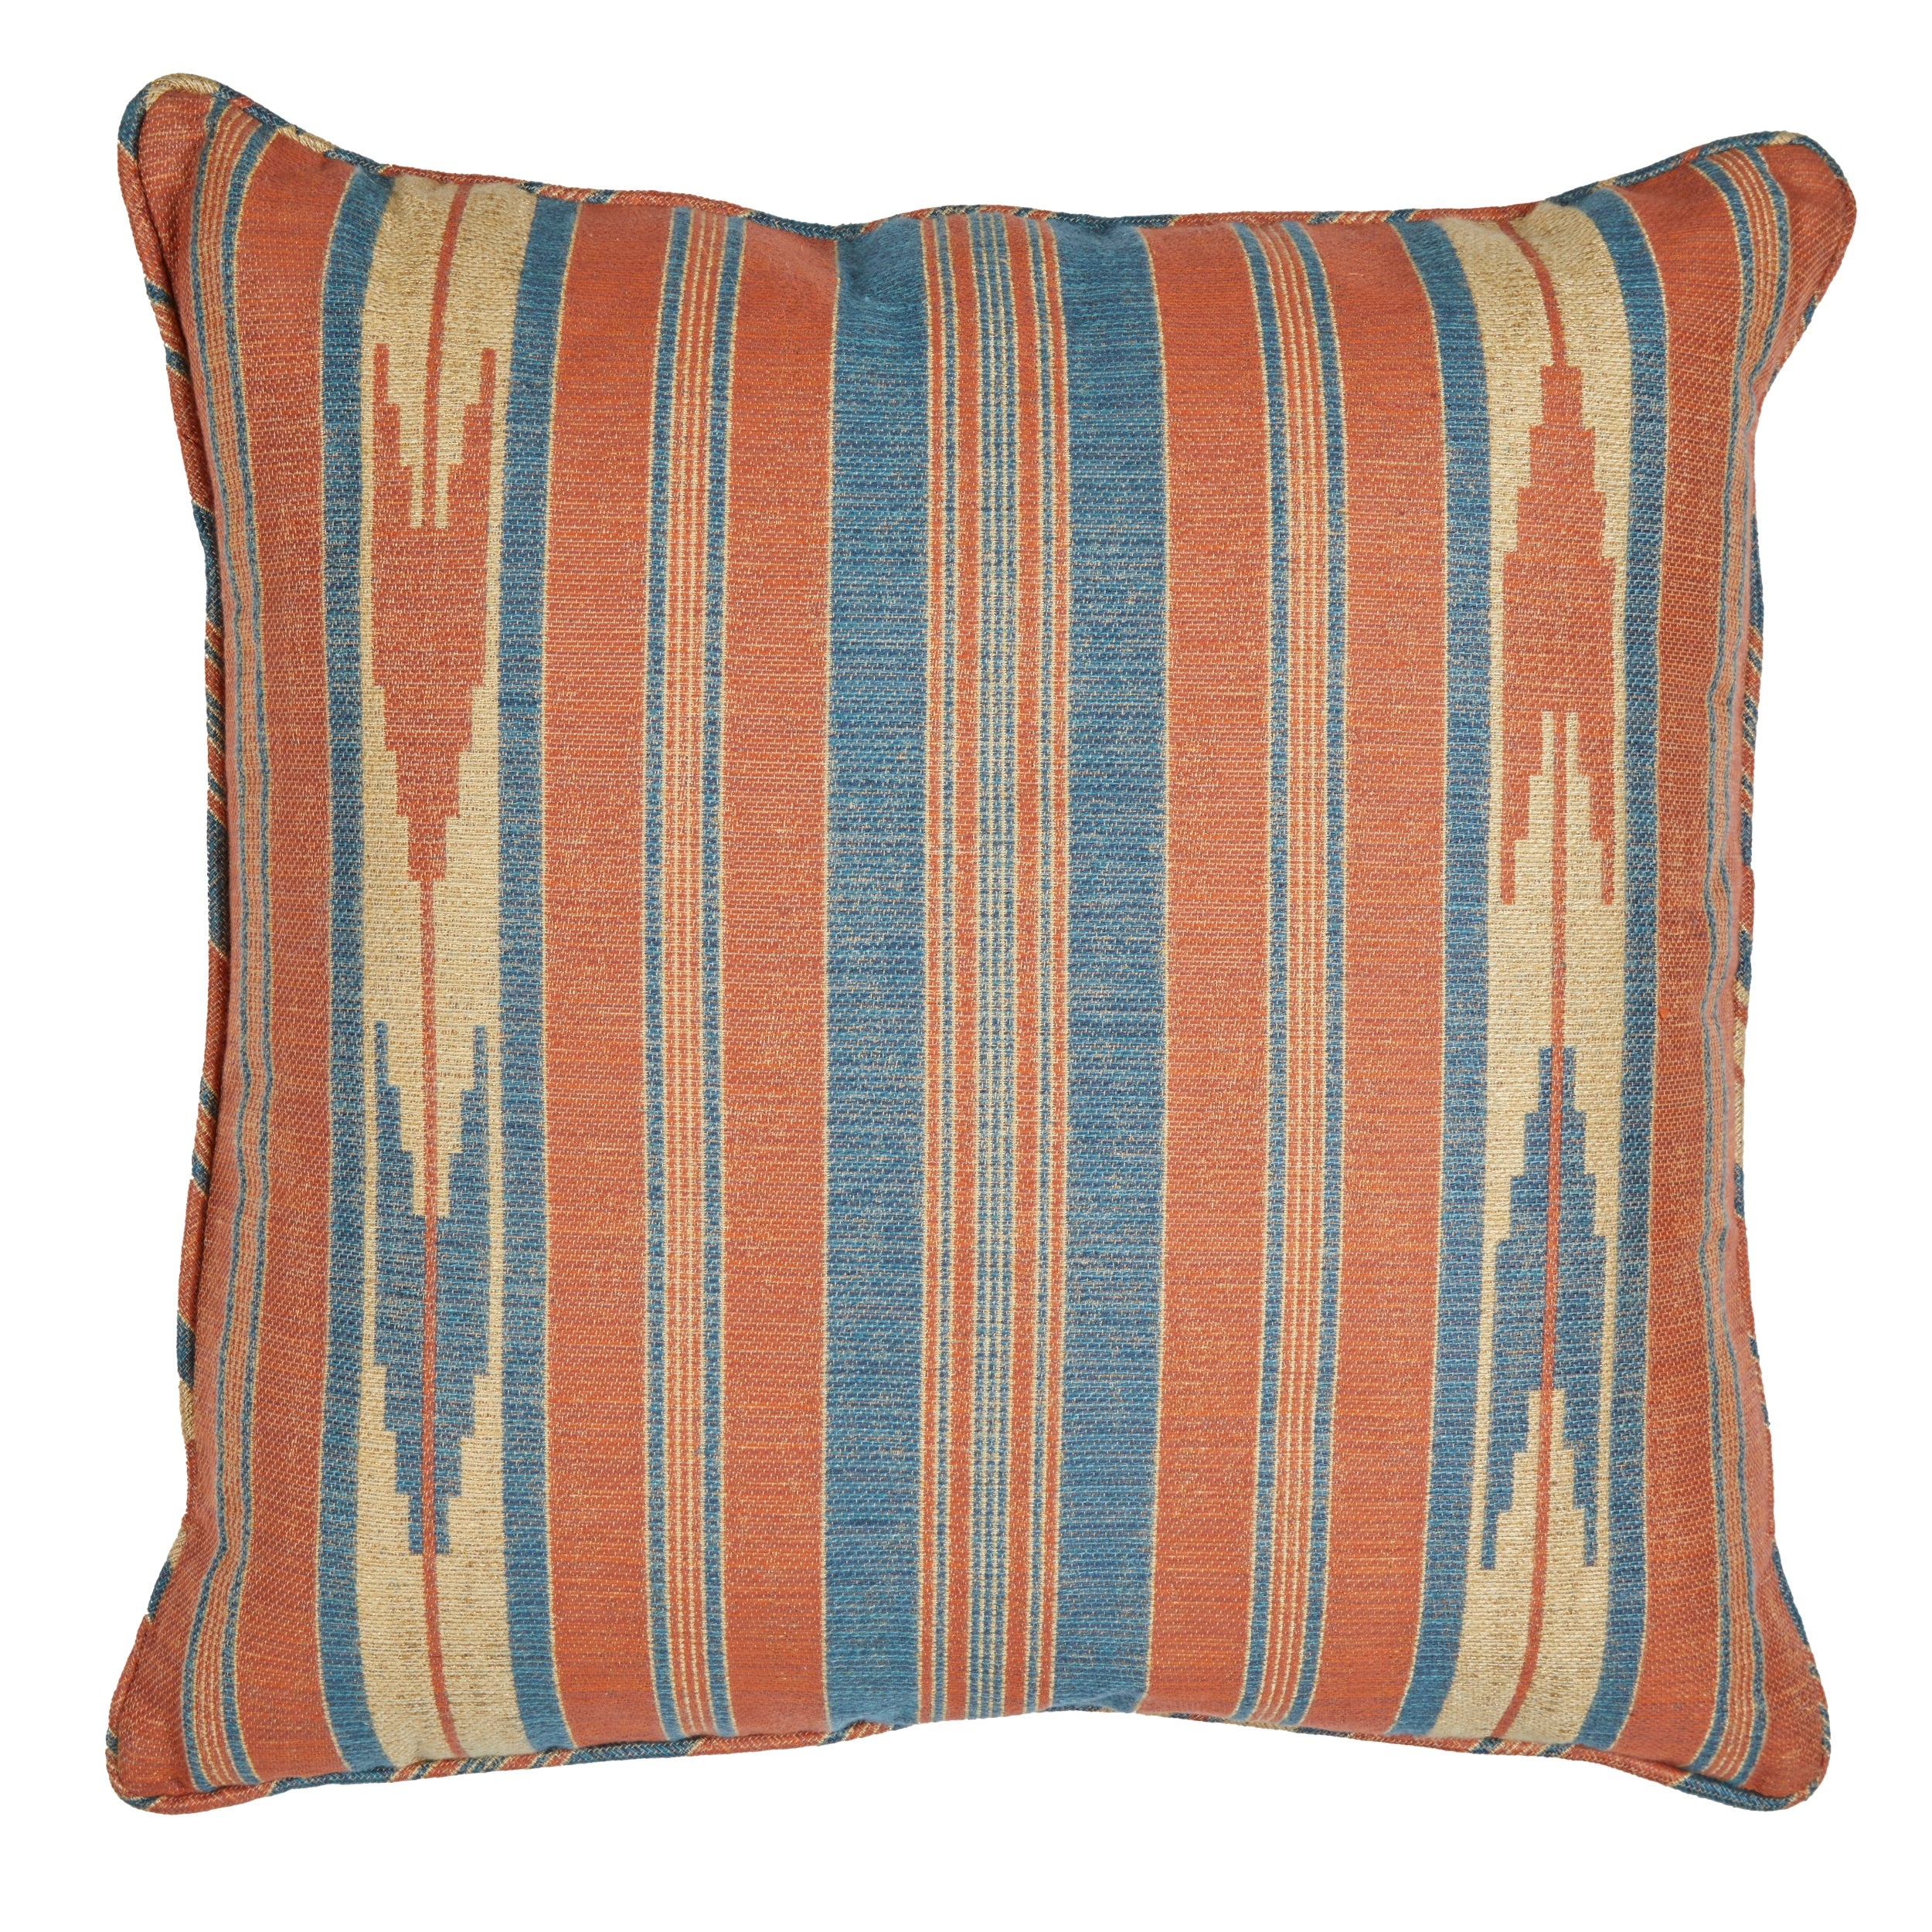 Oulton Stripe Clementine Square Cushion with Self Piping